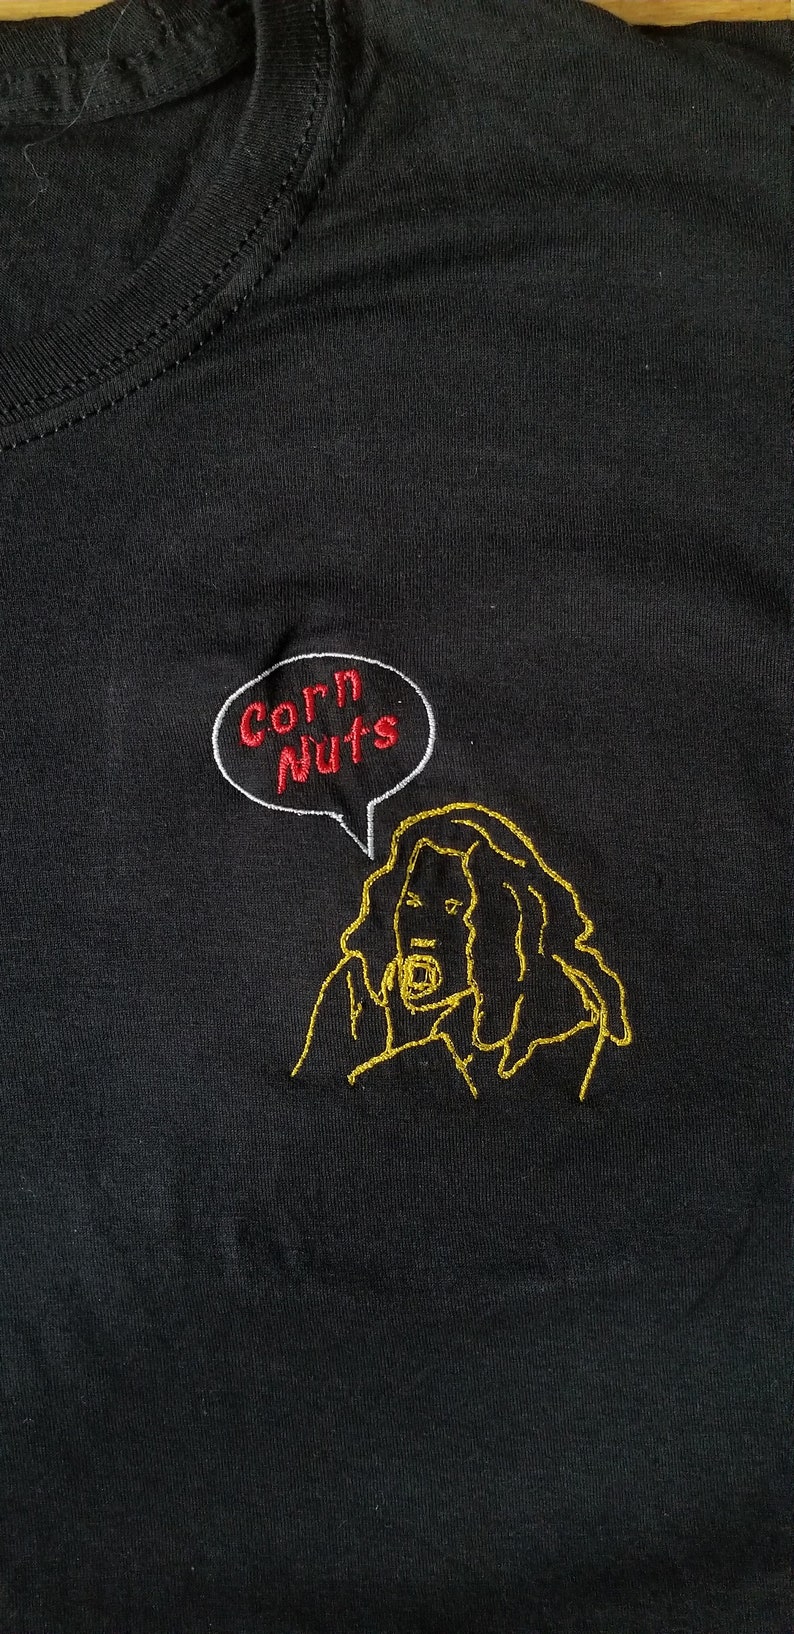 Embroidery Heathers Heather Chandler Corn Nuts T-shirt - Etsy